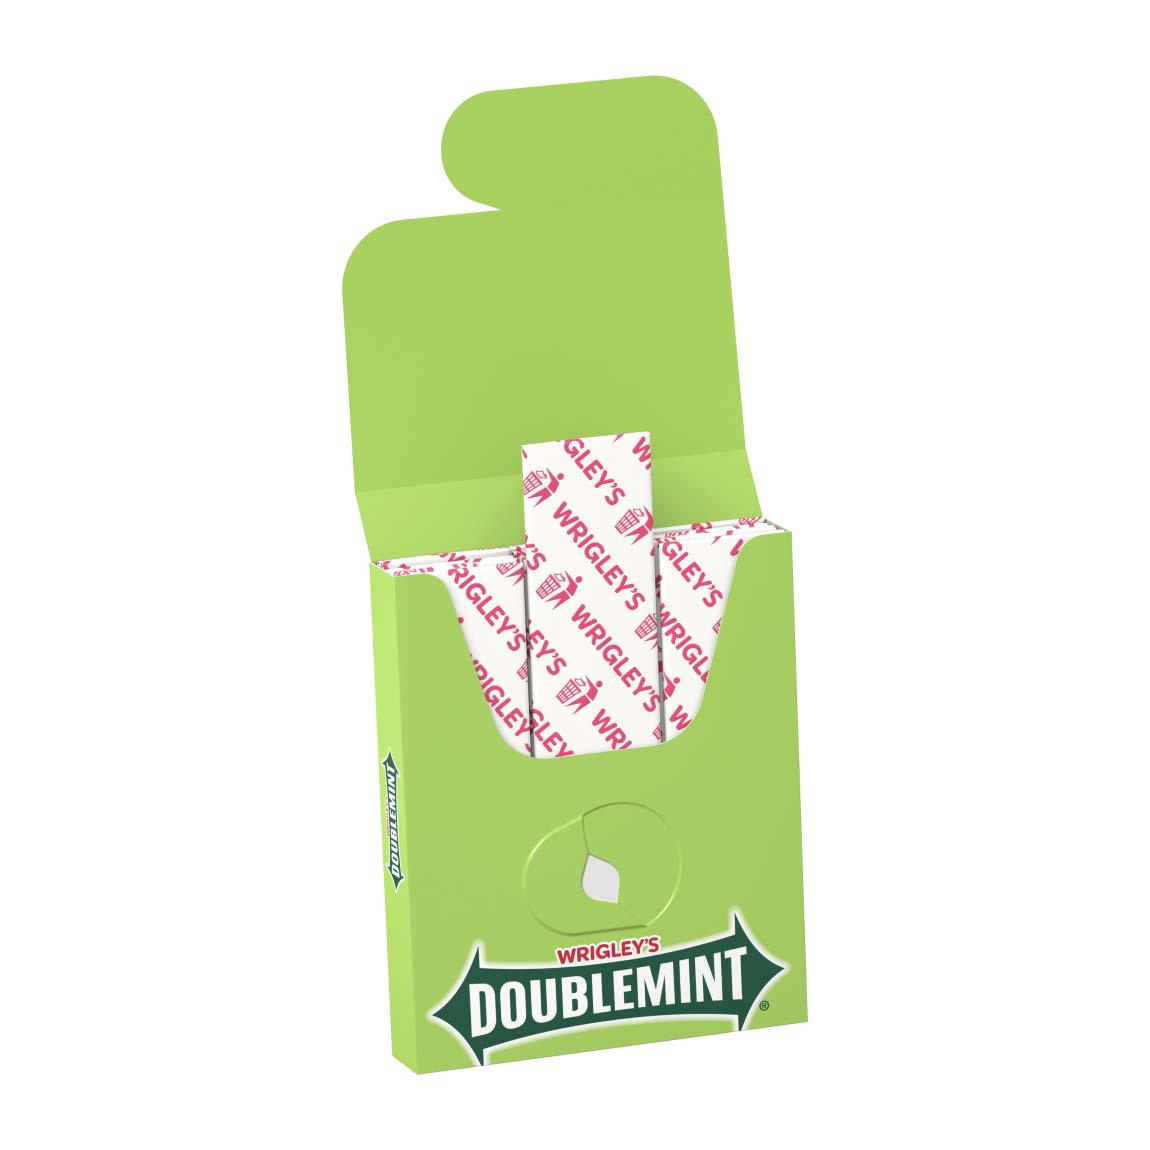 Wrigley's Doublemint Chewing Gum Value Pack, 8 Pk; image 6 of 6